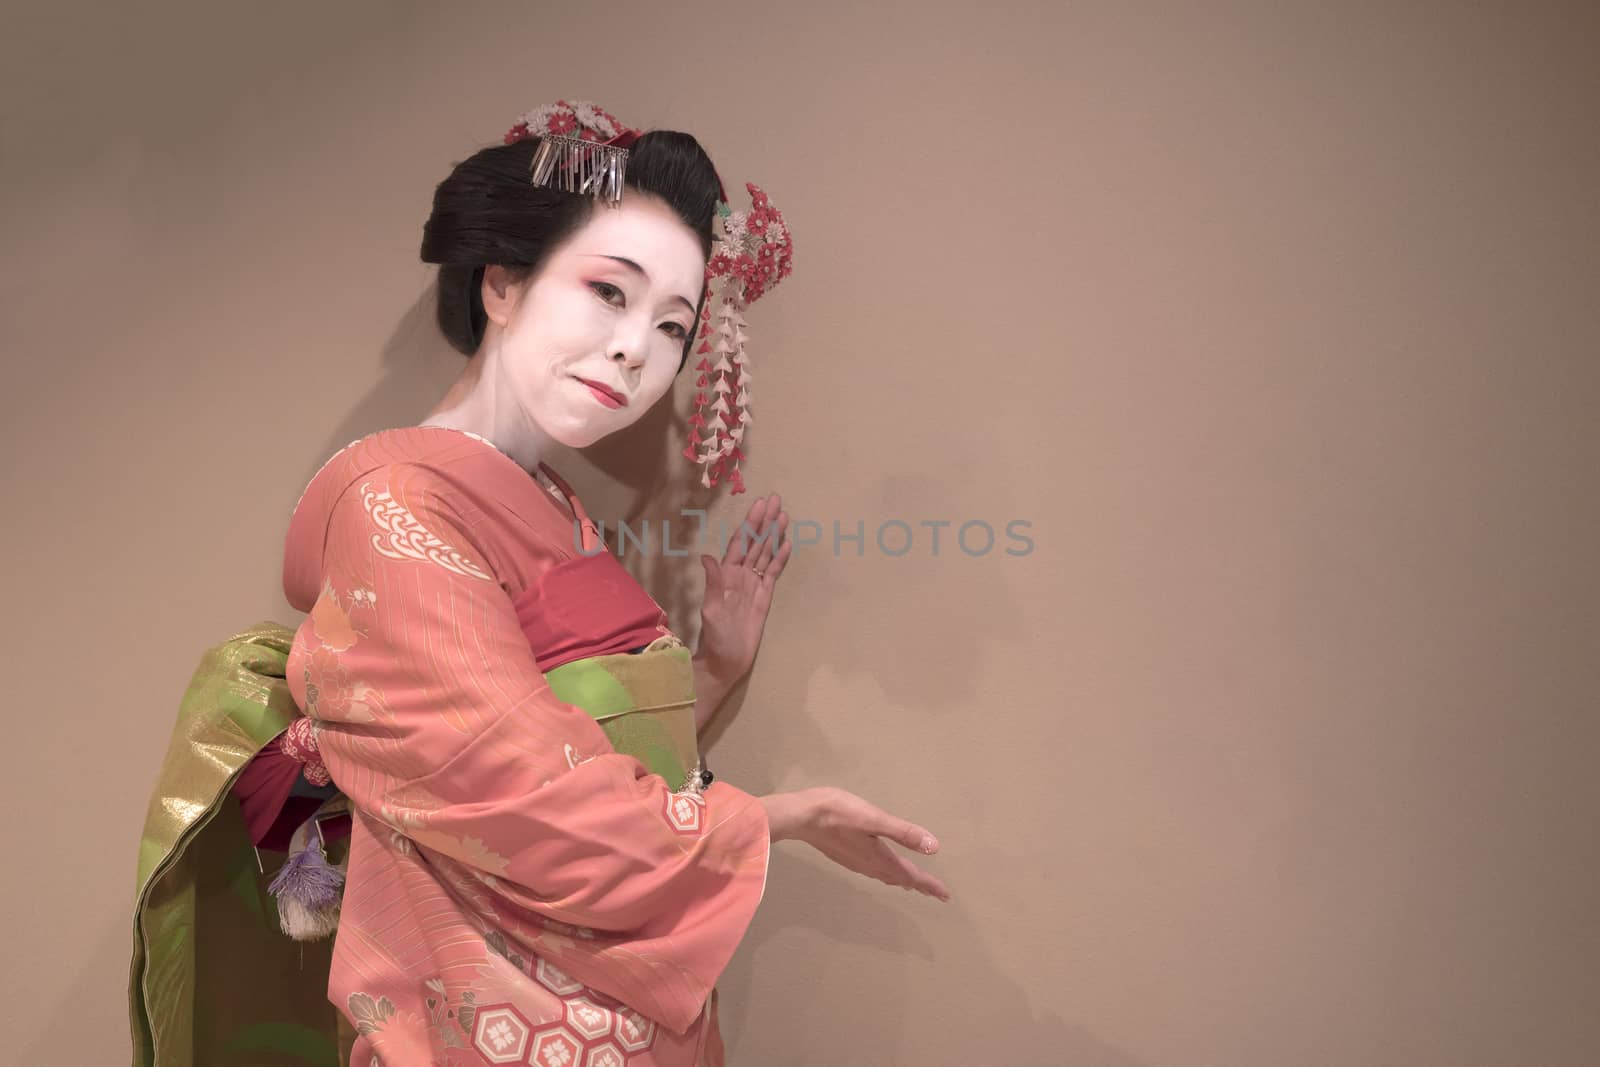 Clipping japanese geisha maiko girl in red kimono coifed hair brooch with patterns of red and white plum blossoms on white background.